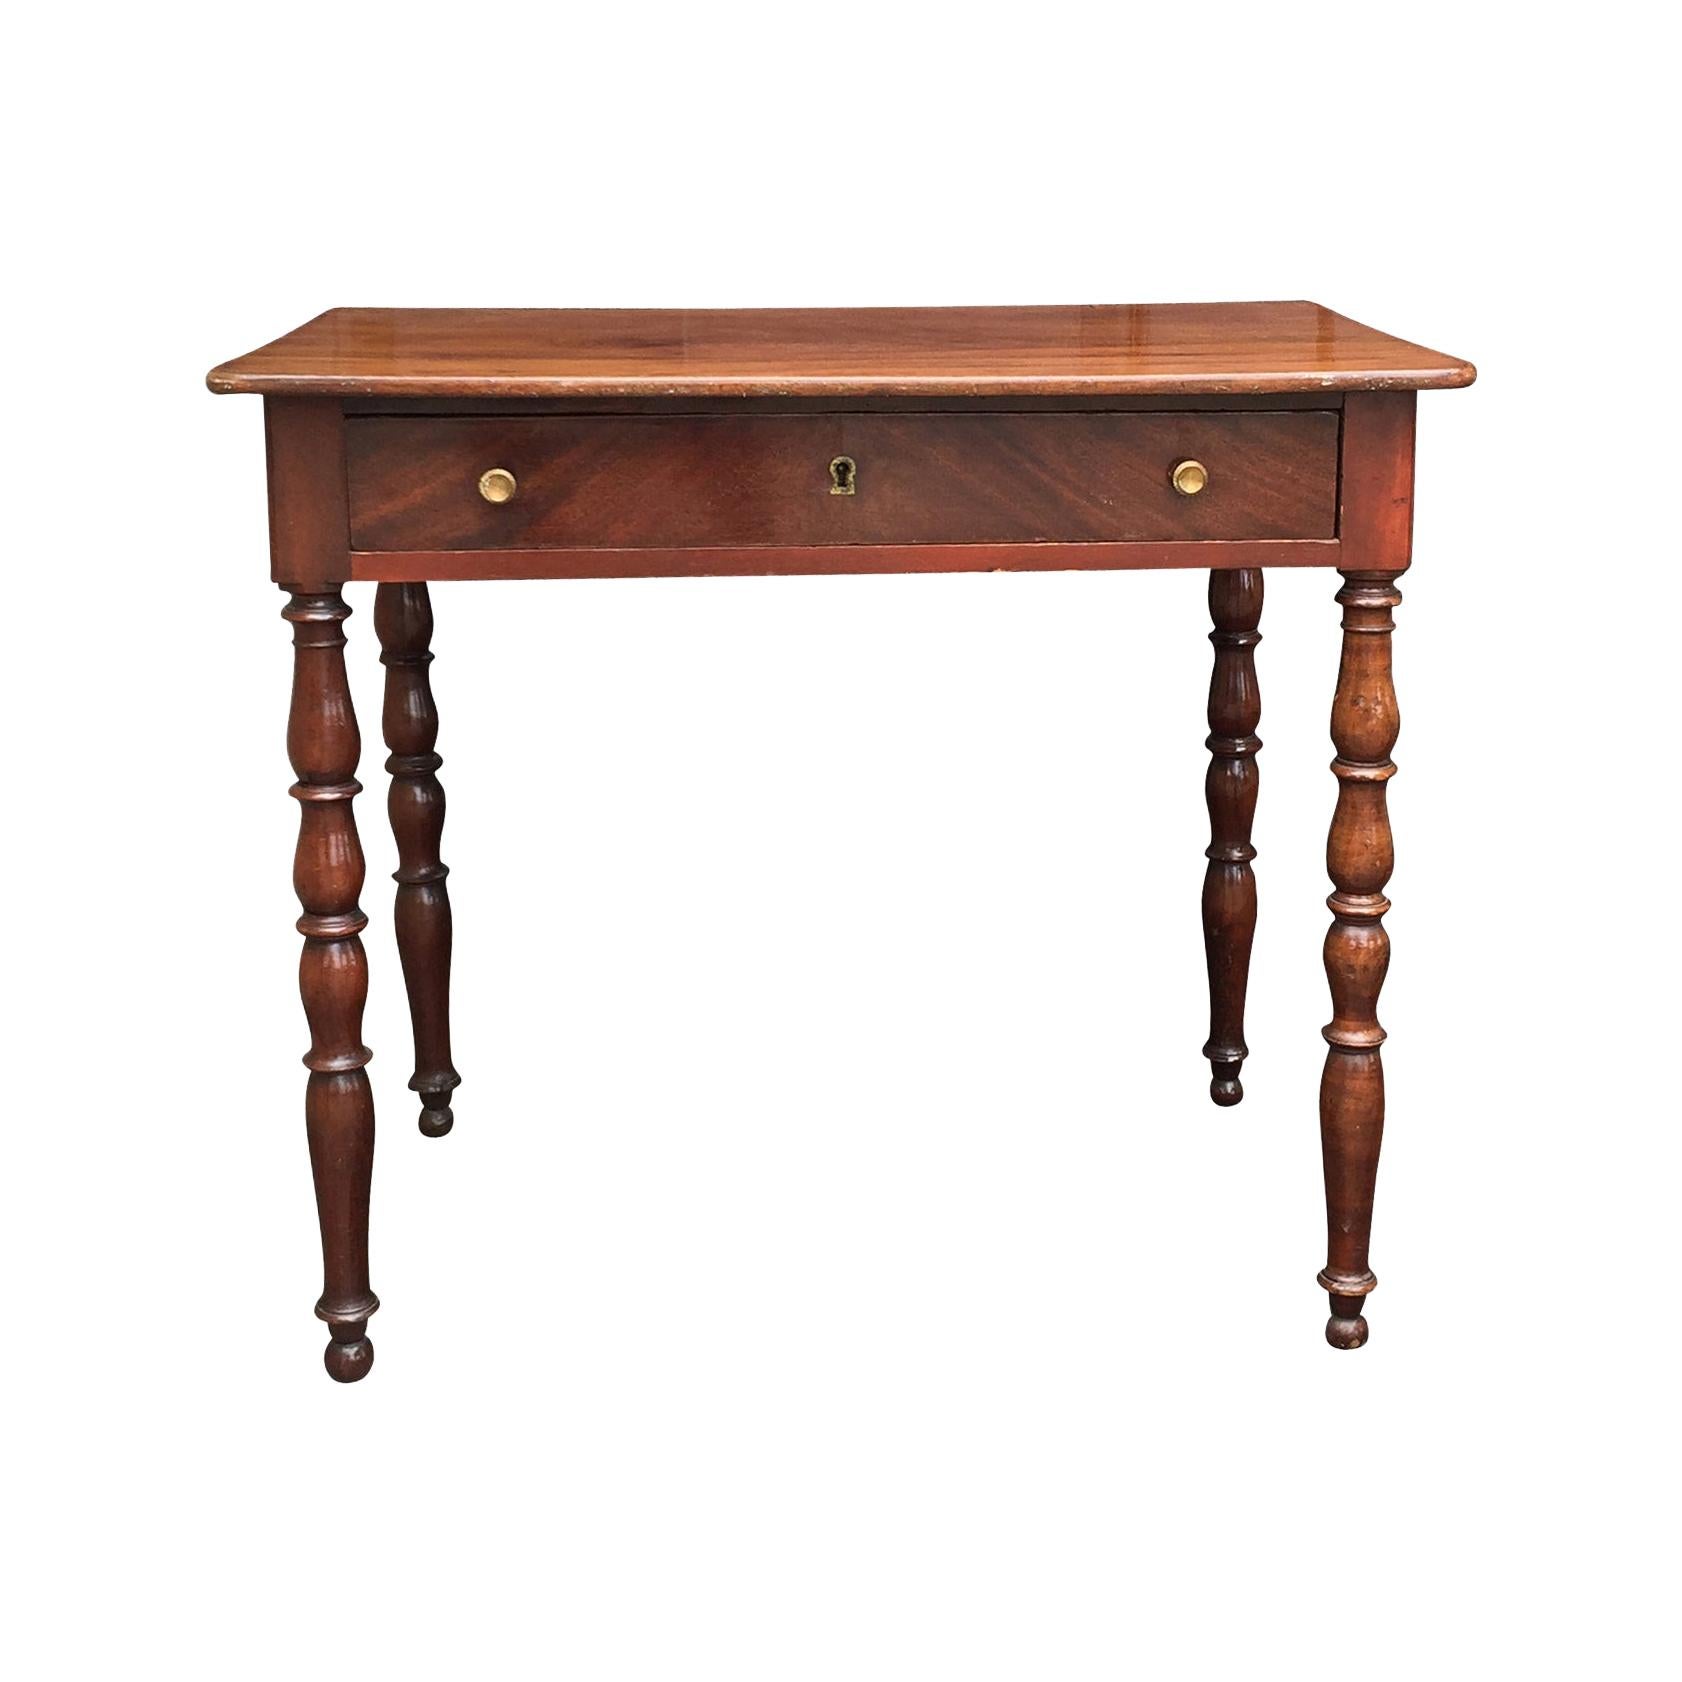 19th Century Regency Mahogany Child's Writing Table with Drawer